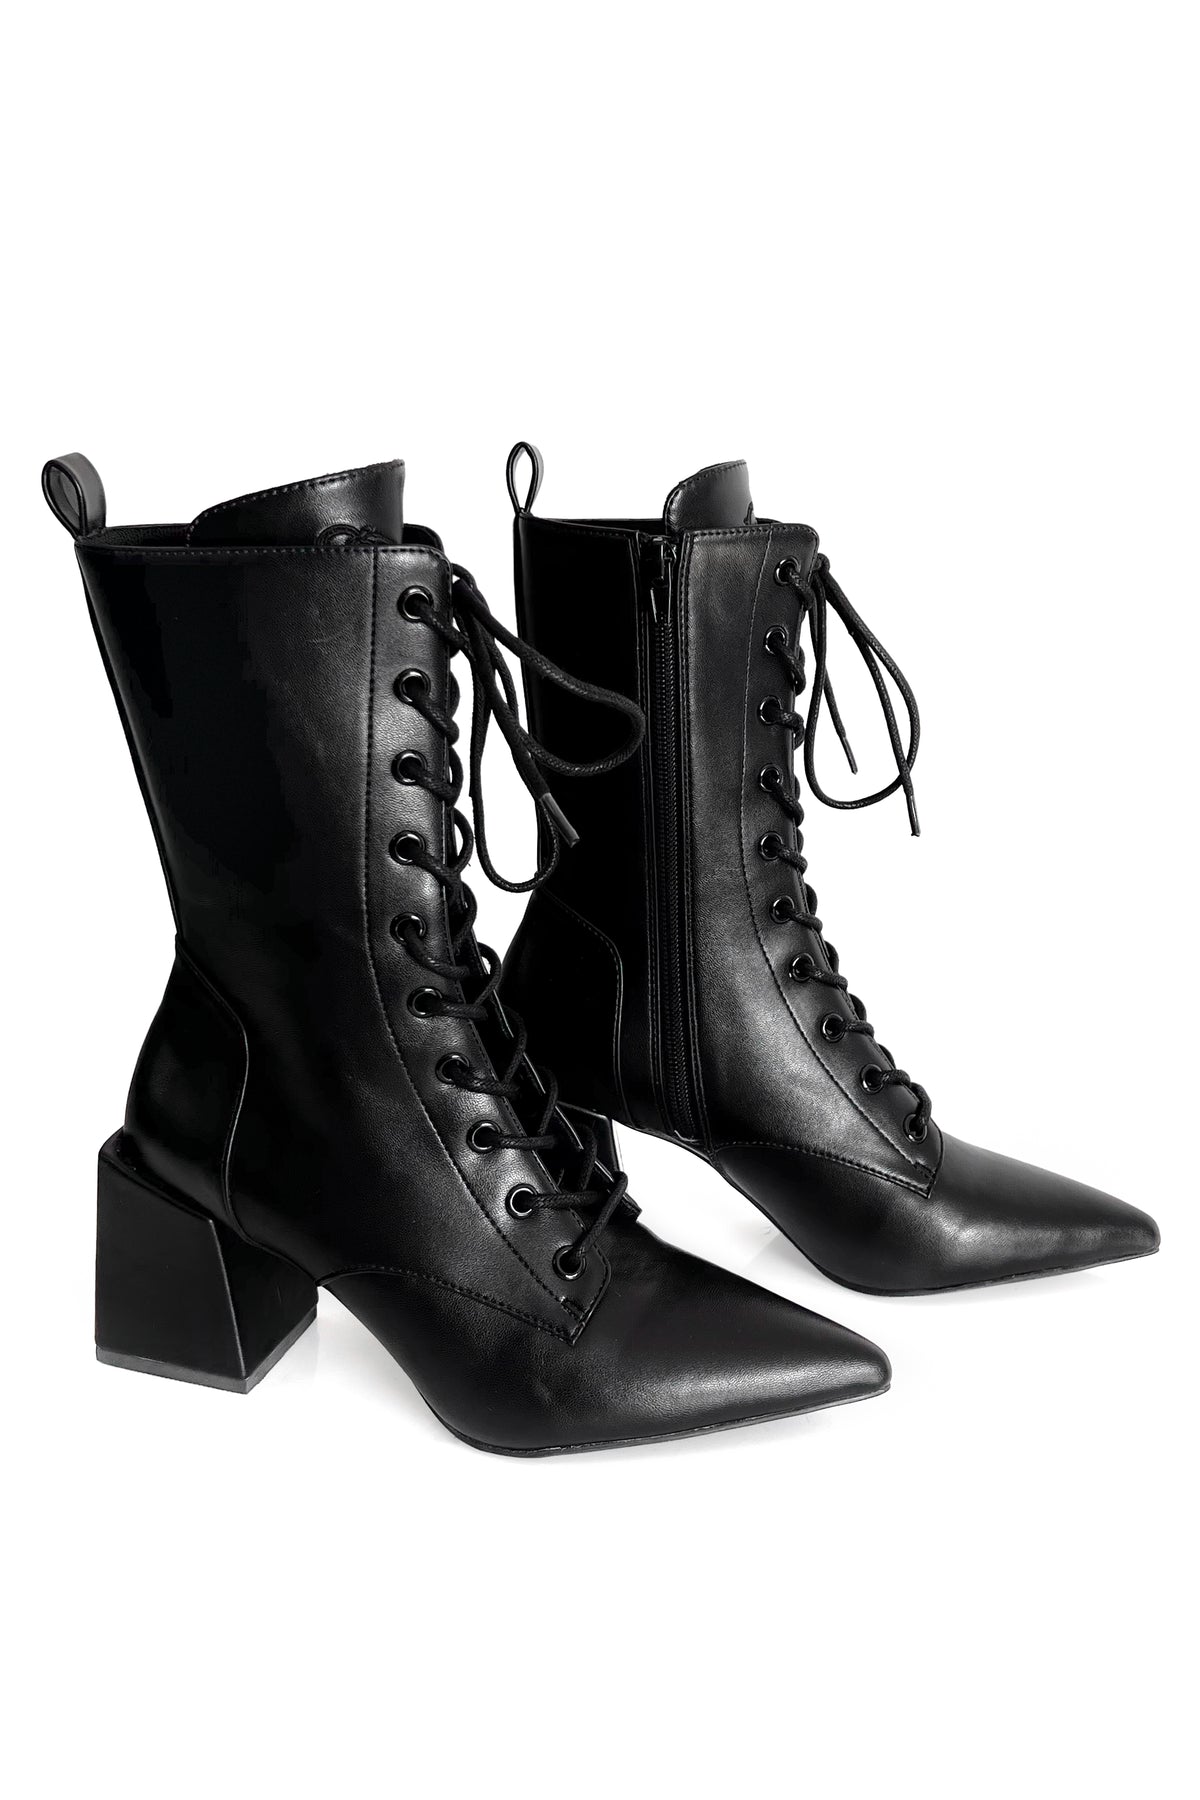 black vegan leather pointed toe boot with squared off heel